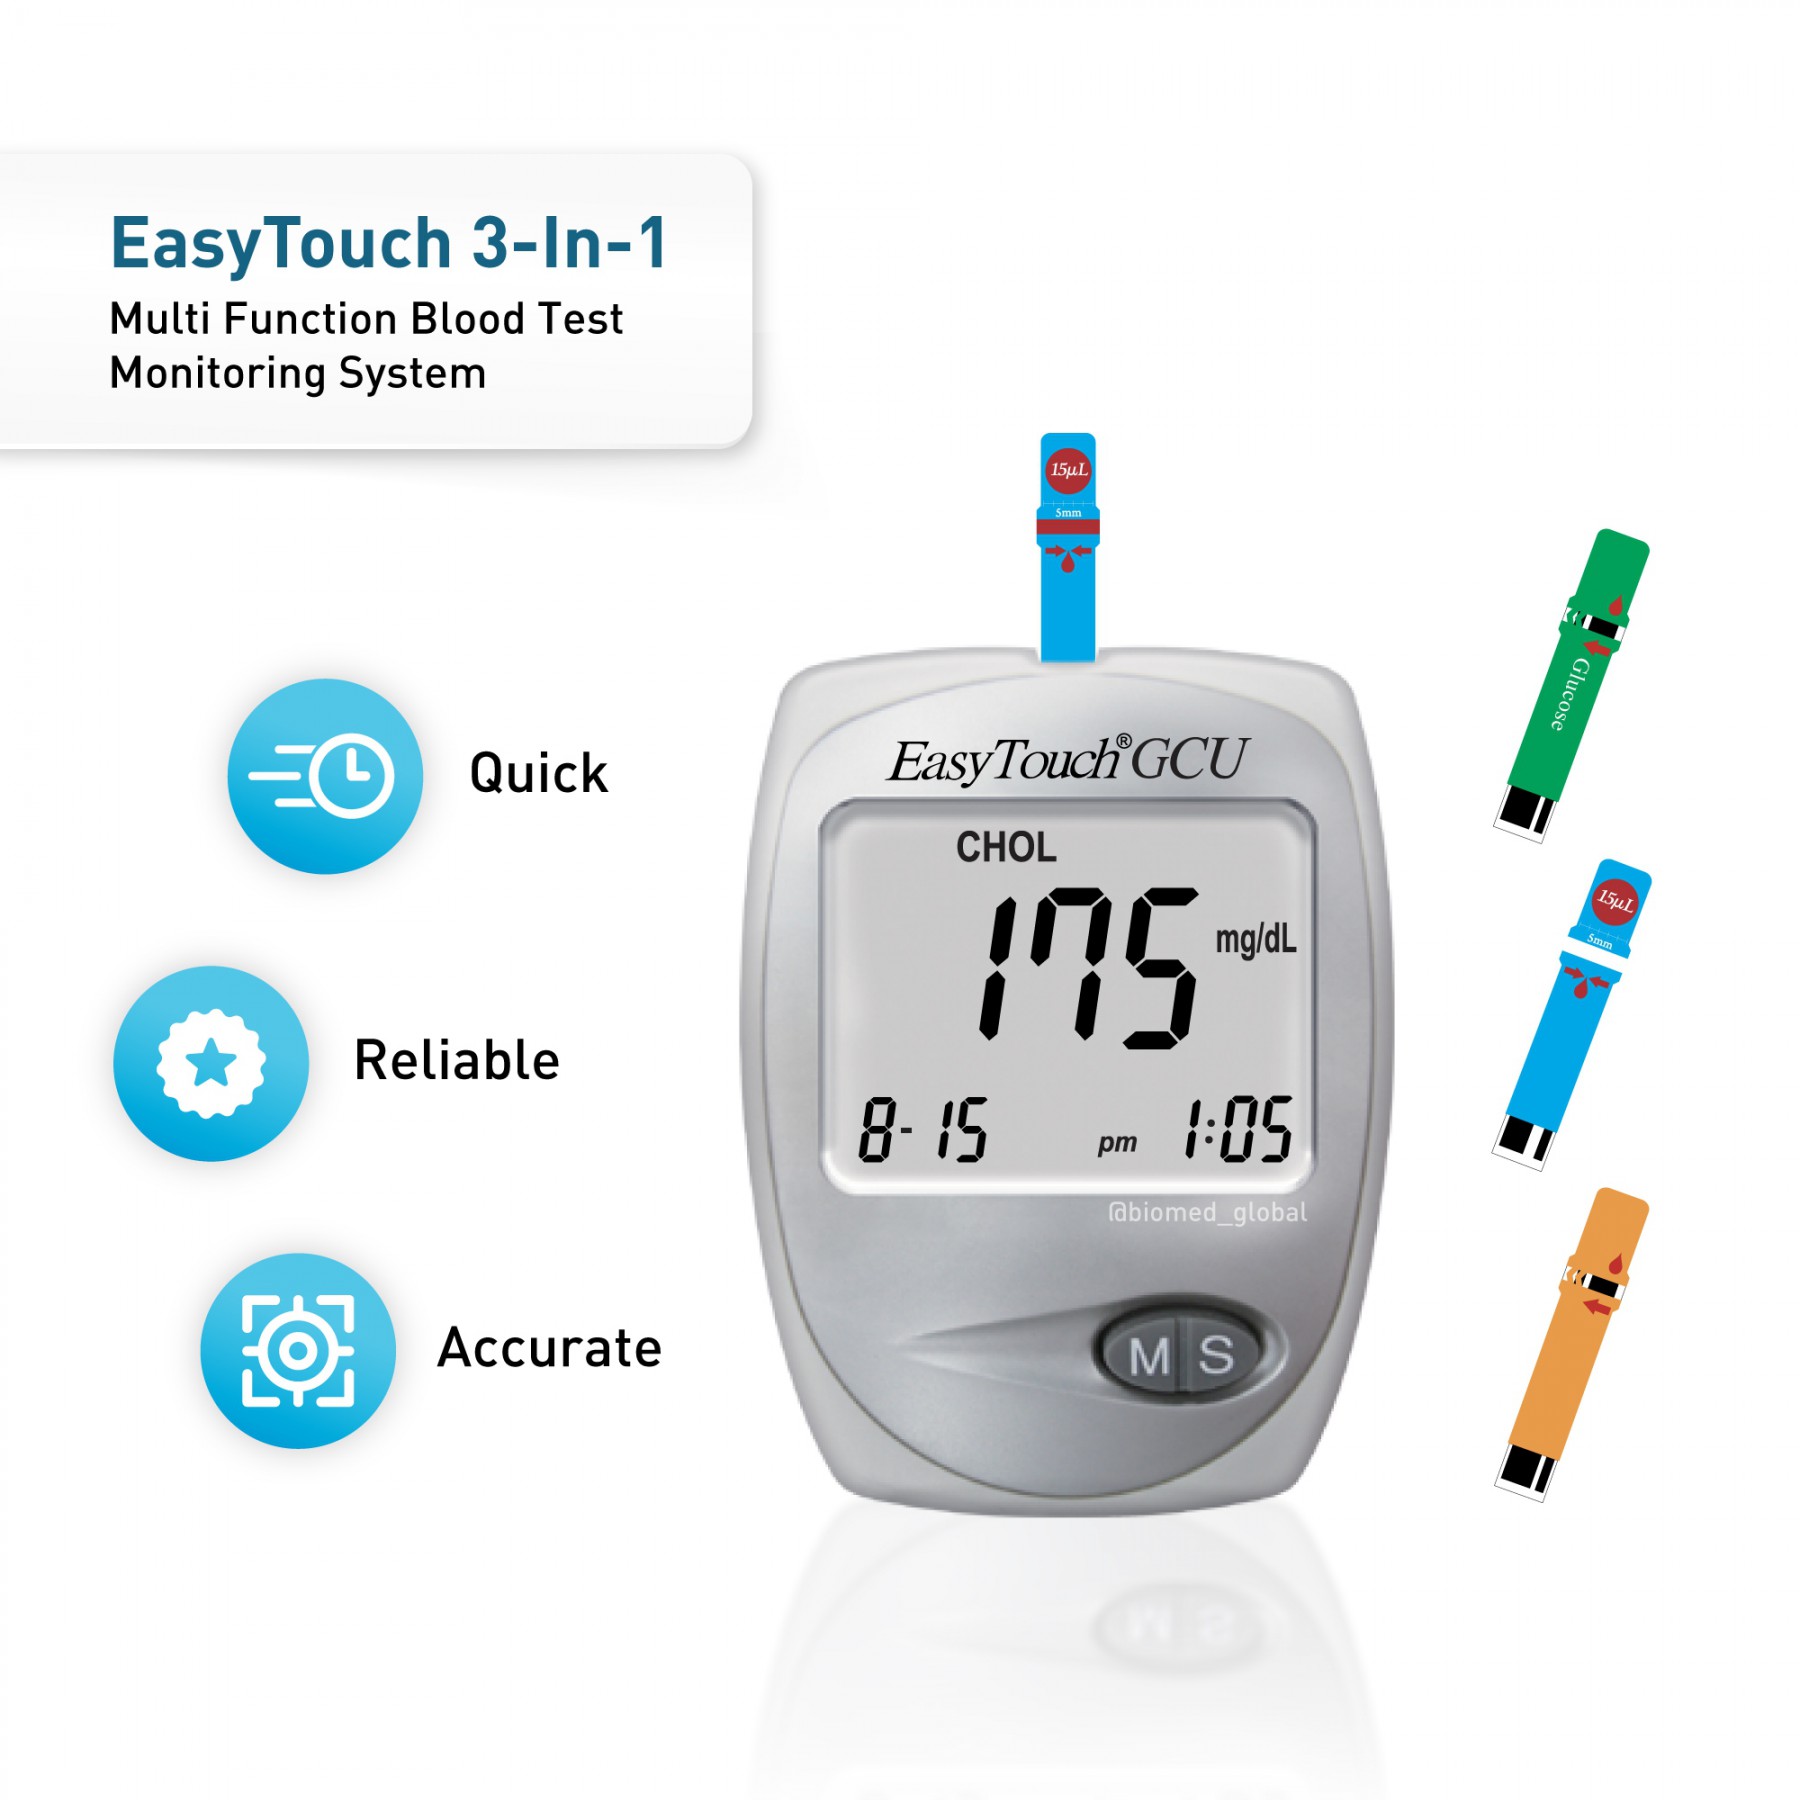 EasyTouch GCU 3-in-1 Blood Glucose, Cholesterol and Uric Acid Meter, FREE with 50 Blood Glucose Test Strips (BUNDLE PACK)